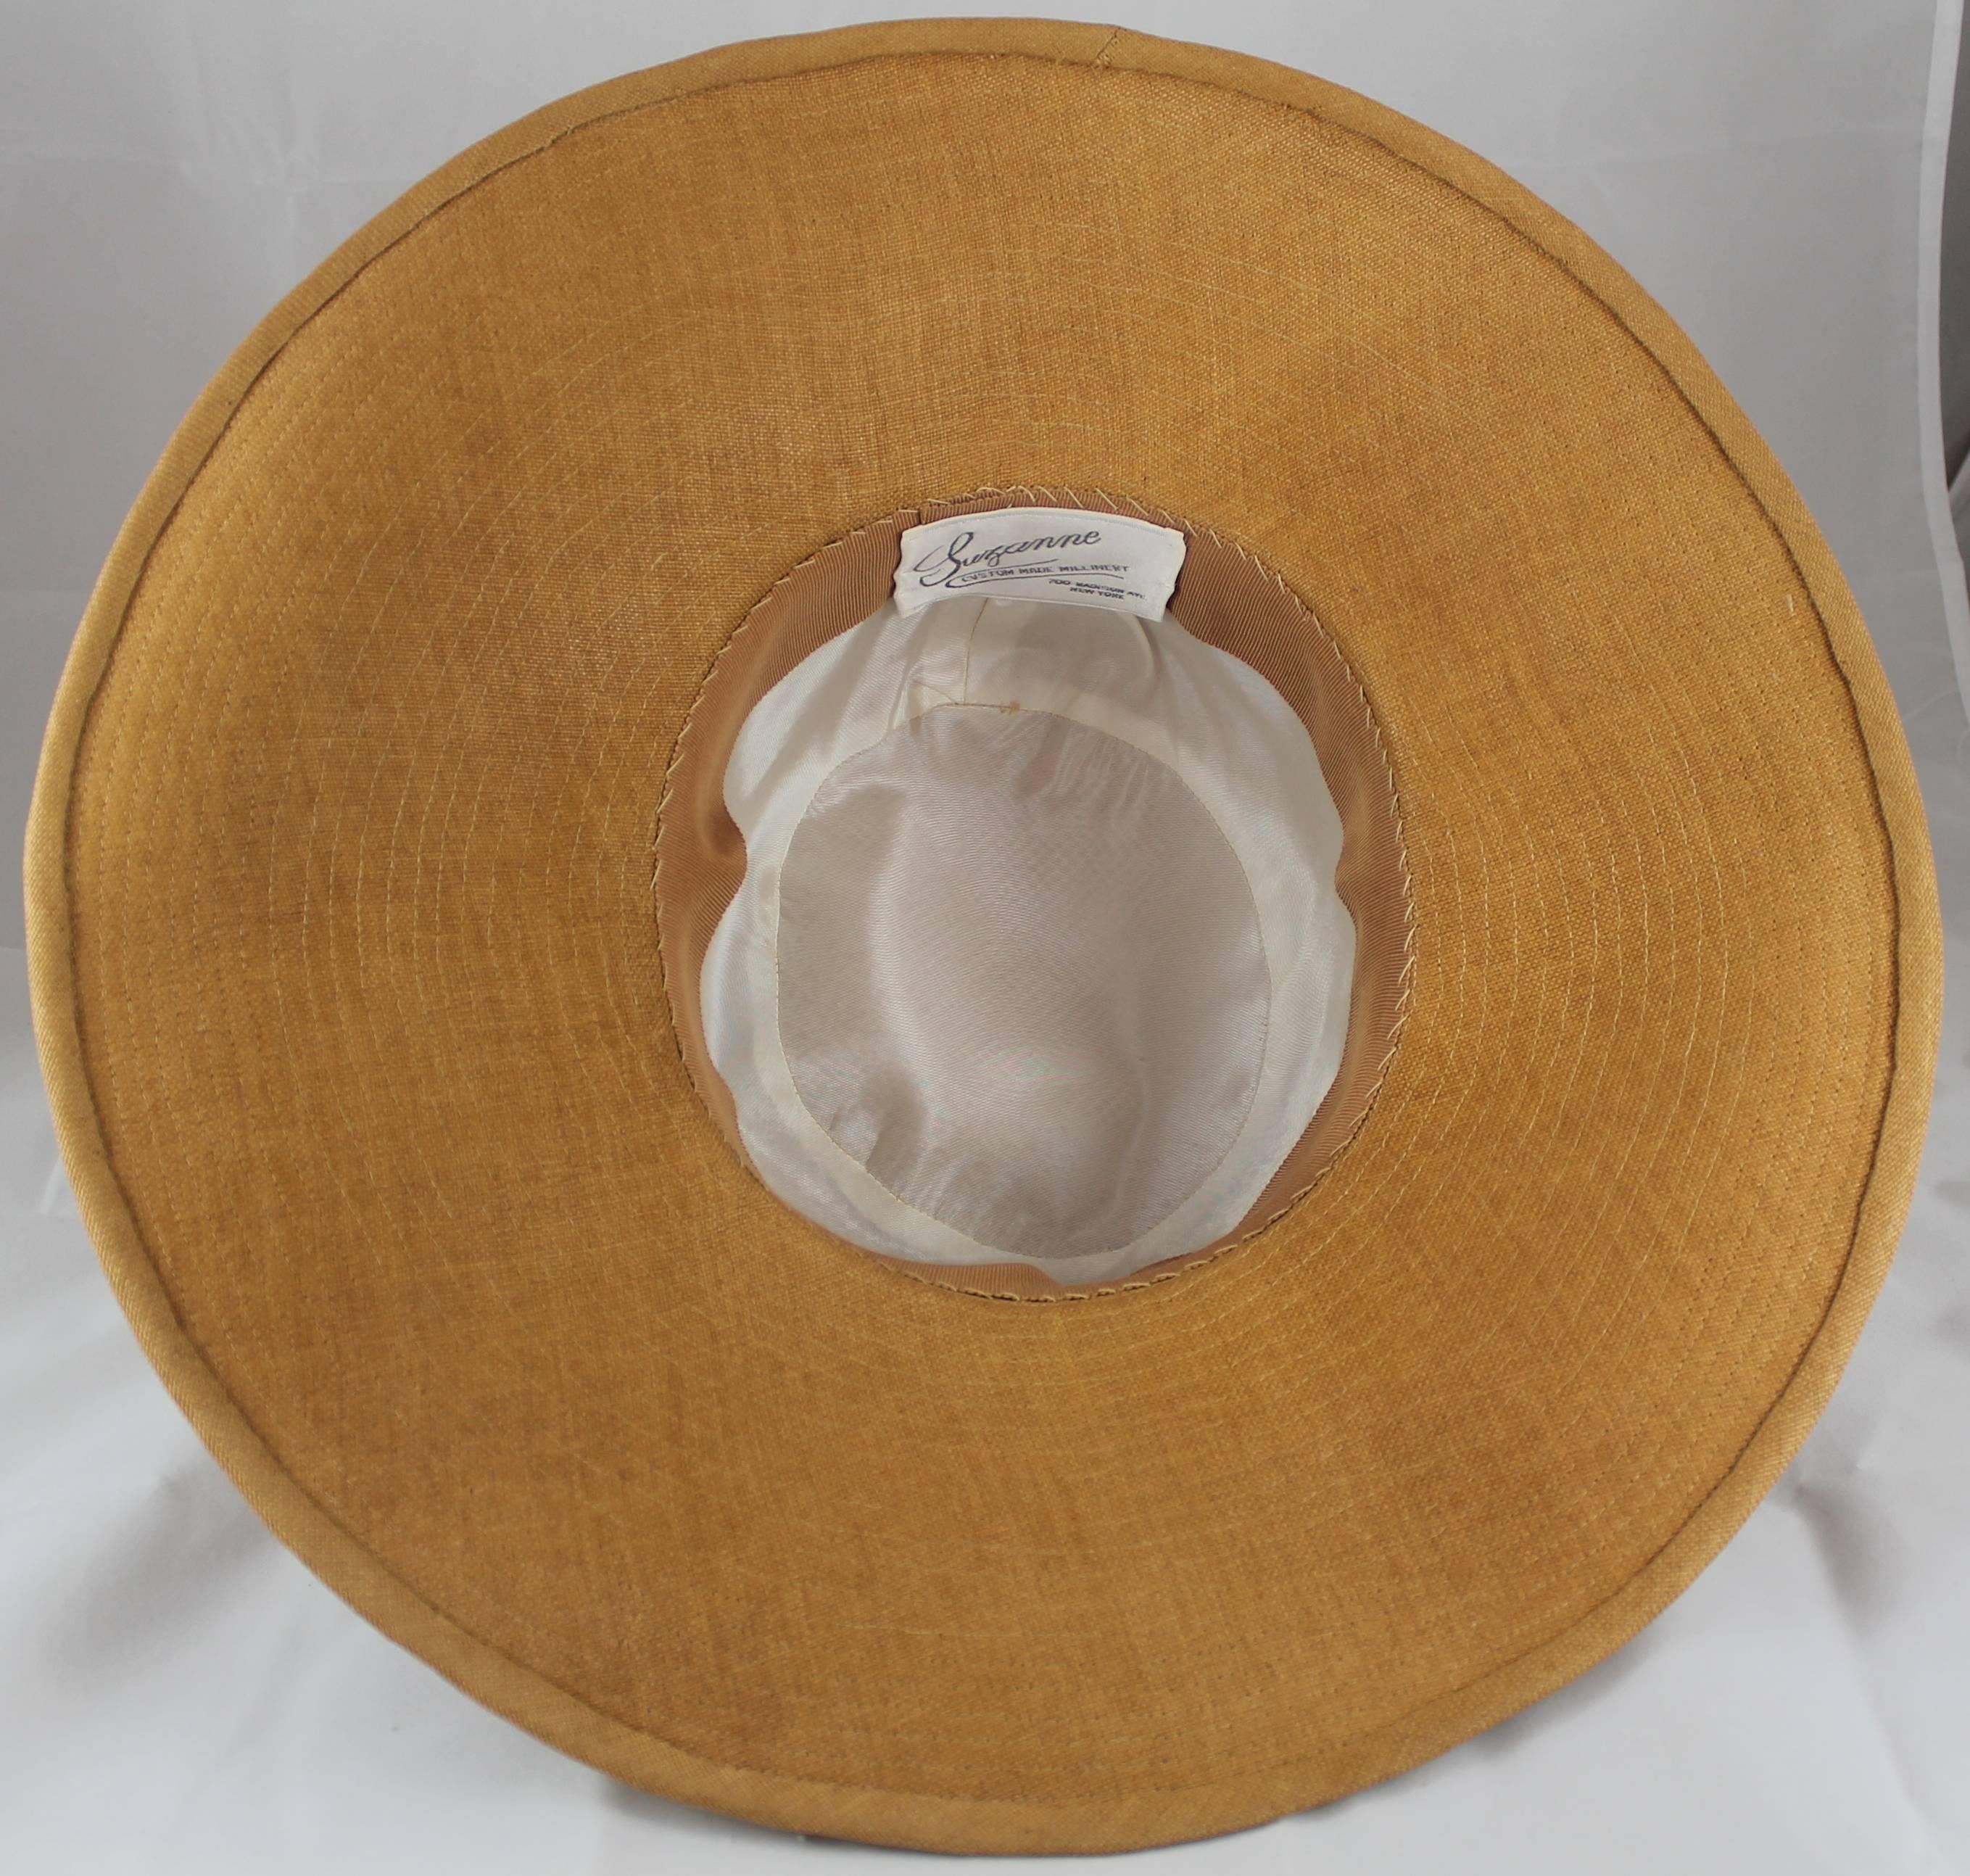 Suzanne Couture Millinery Luggage Straw Hat with Lucite Pins  1